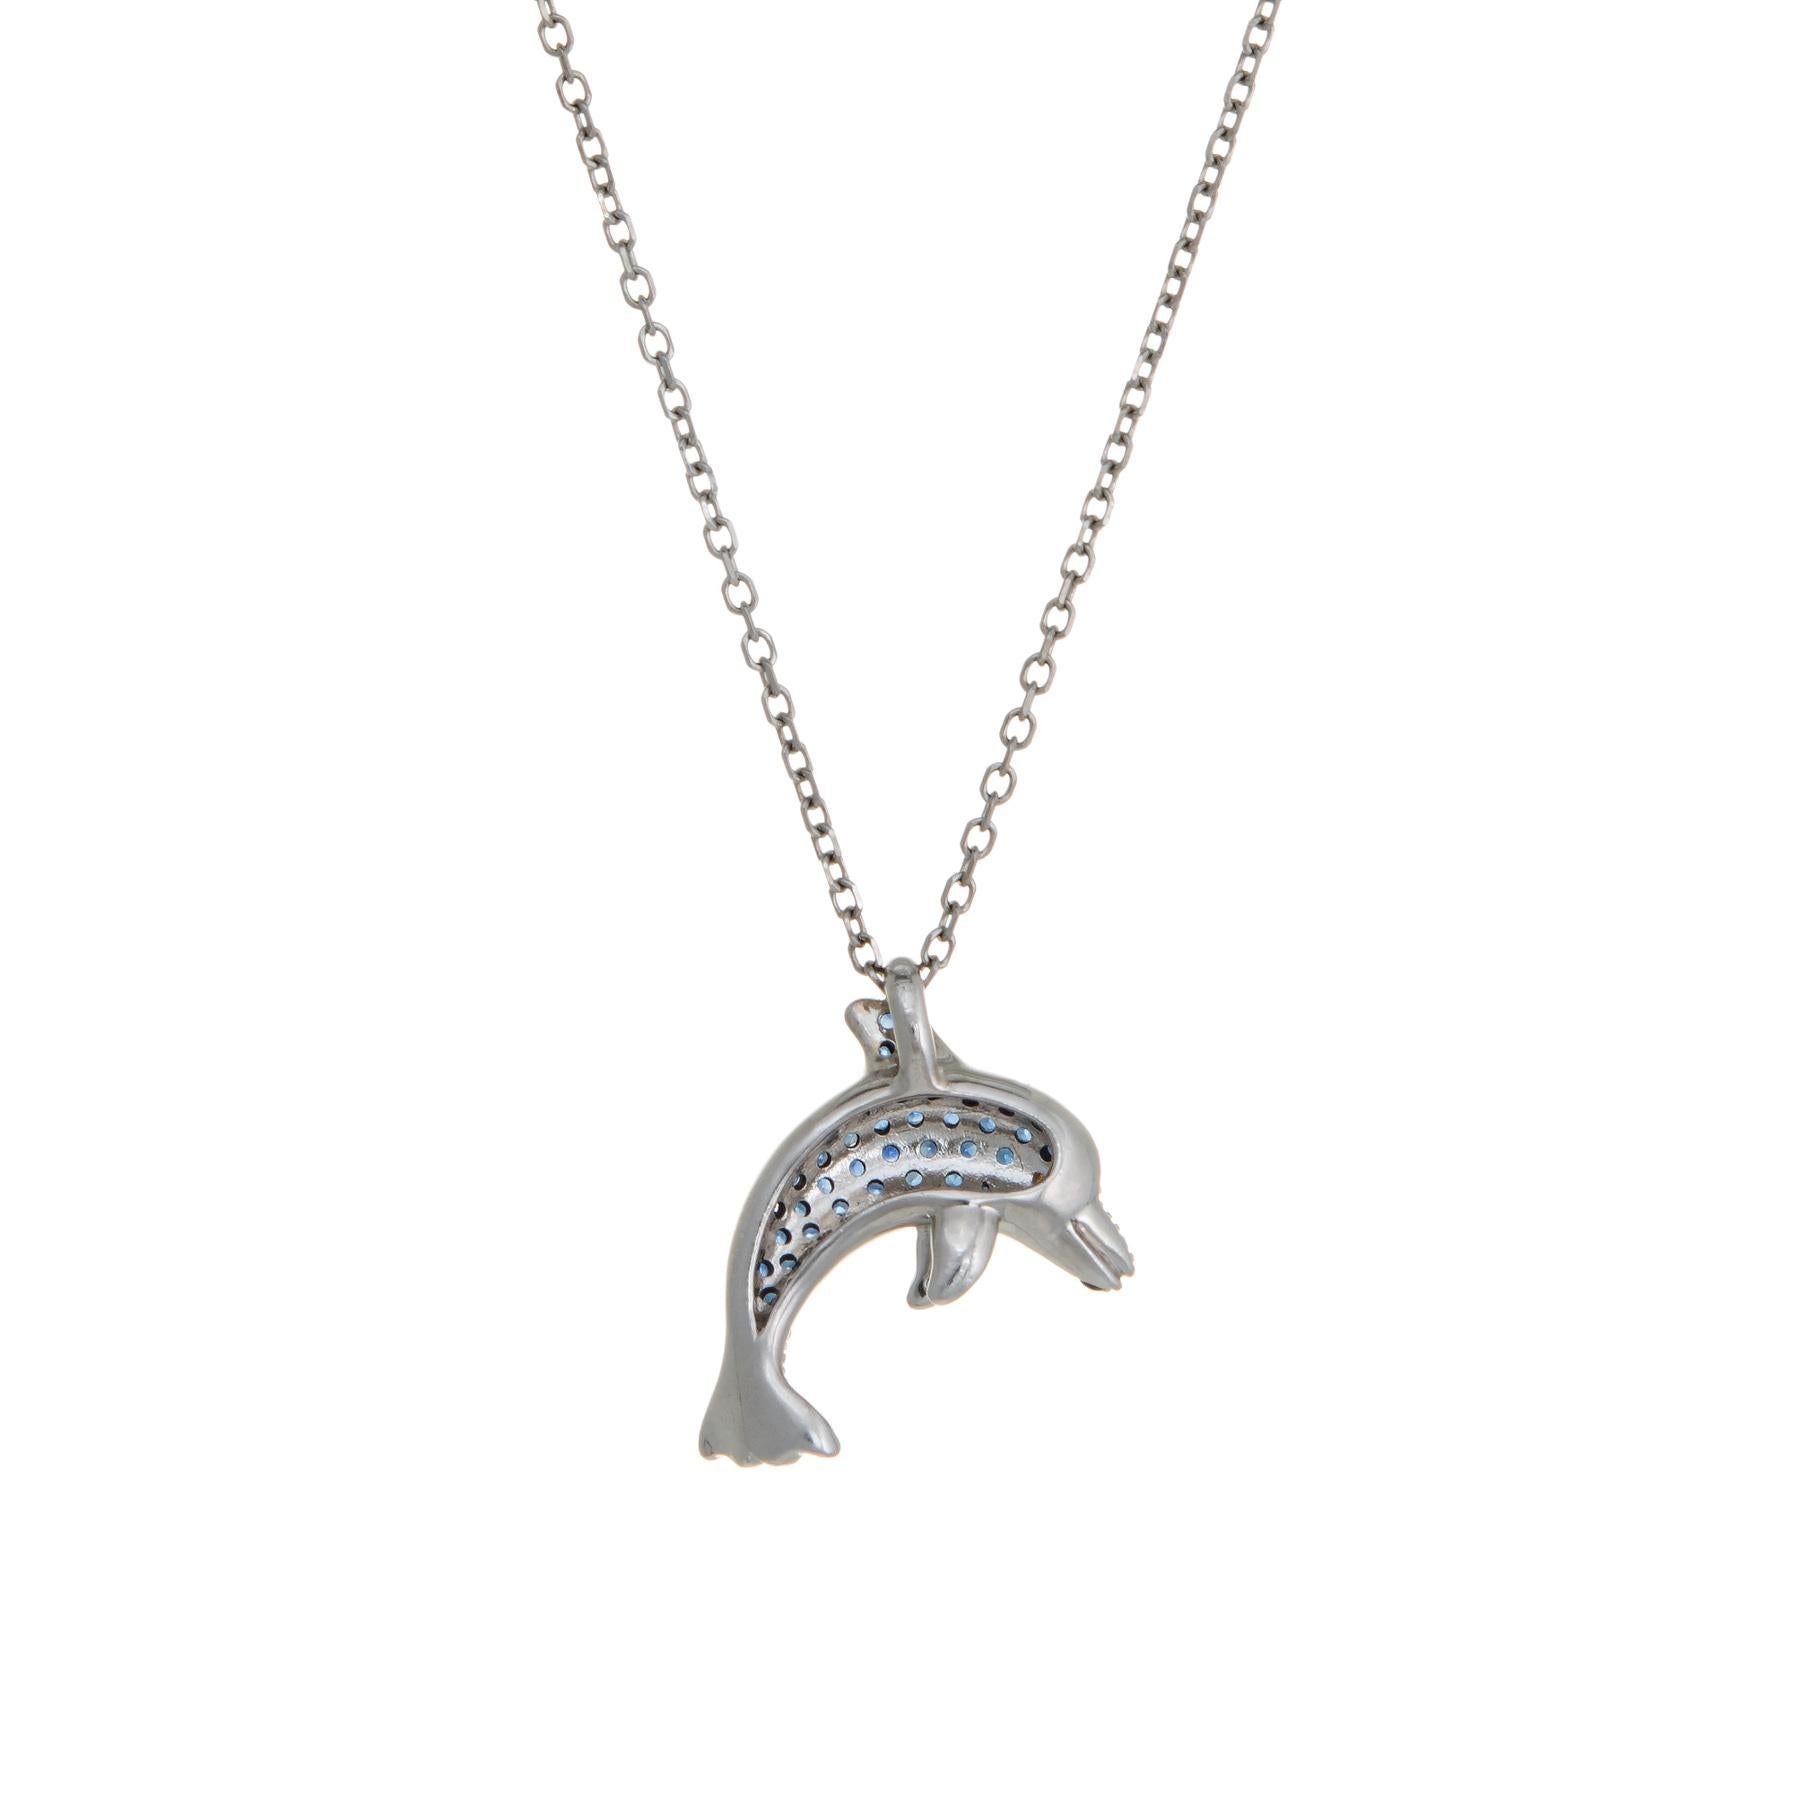 Elegant and finely detailed estate sapphire & diamond dolphin pendant & necklace, crafted in 14 karat white gold.  

Sapphires are pave set into the mount and total an estimated 0.40 carats. The diamonds total an estimated 0.10 carats (estimated at